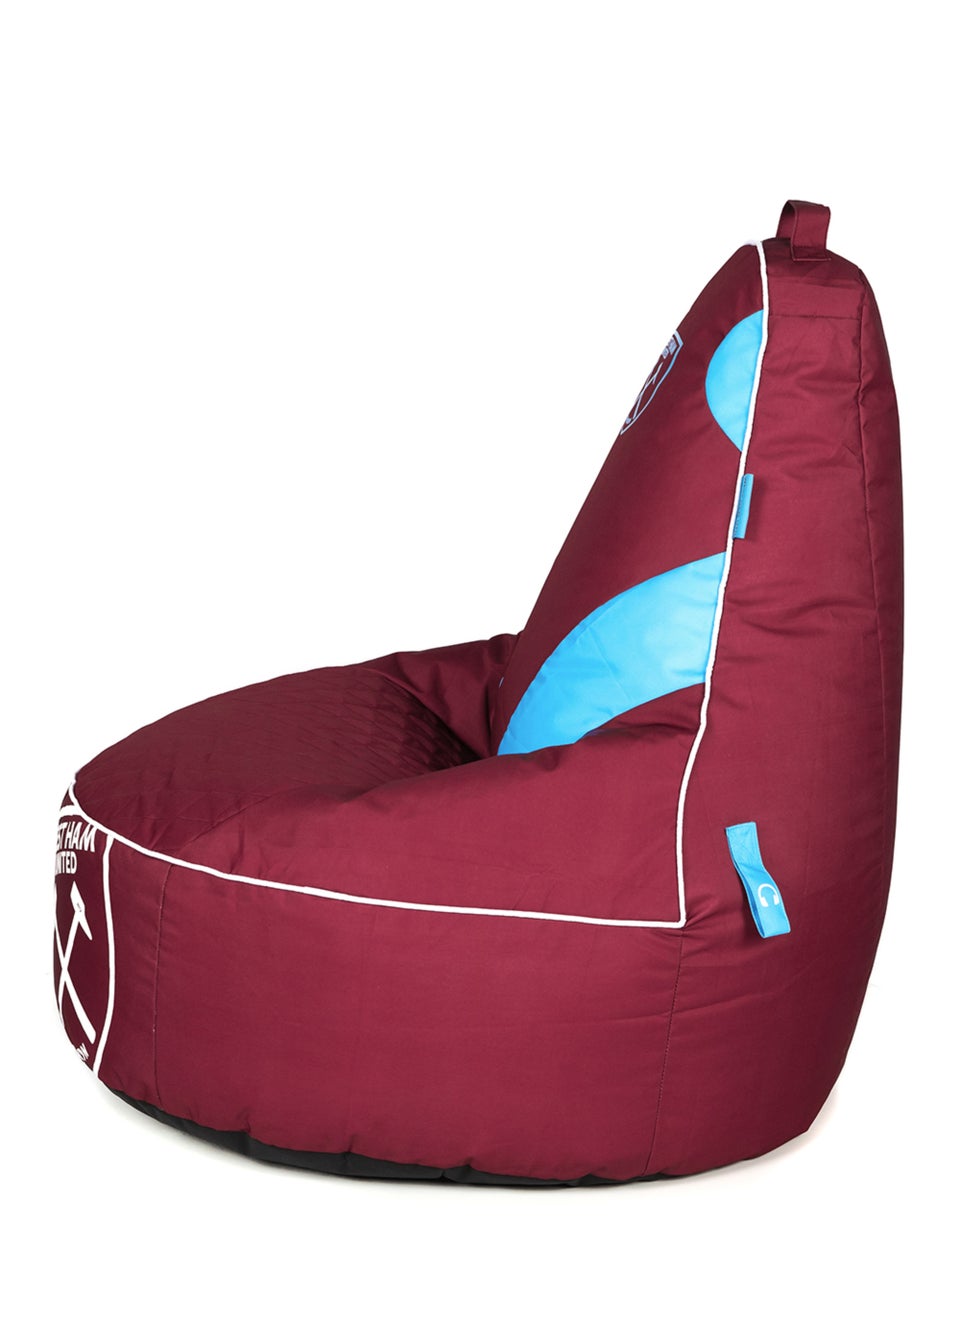 Kaikoo The Big Chill West Ham United FC Gaming Chair Chair